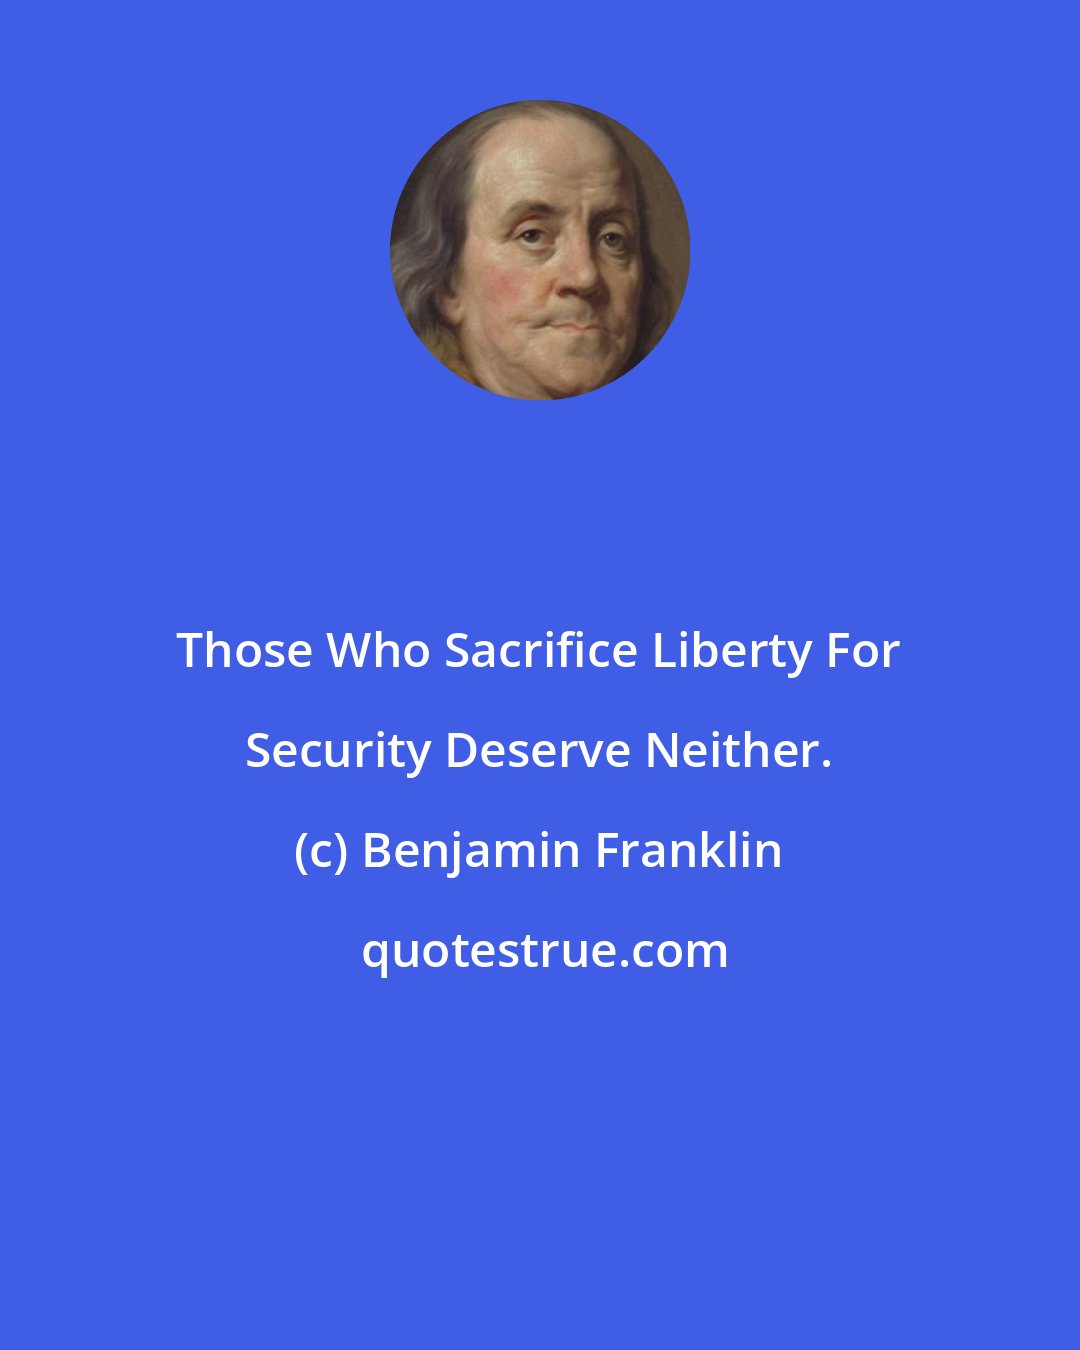 Benjamin Franklin: Those Who Sacrifice Liberty For Security Deserve Neither.